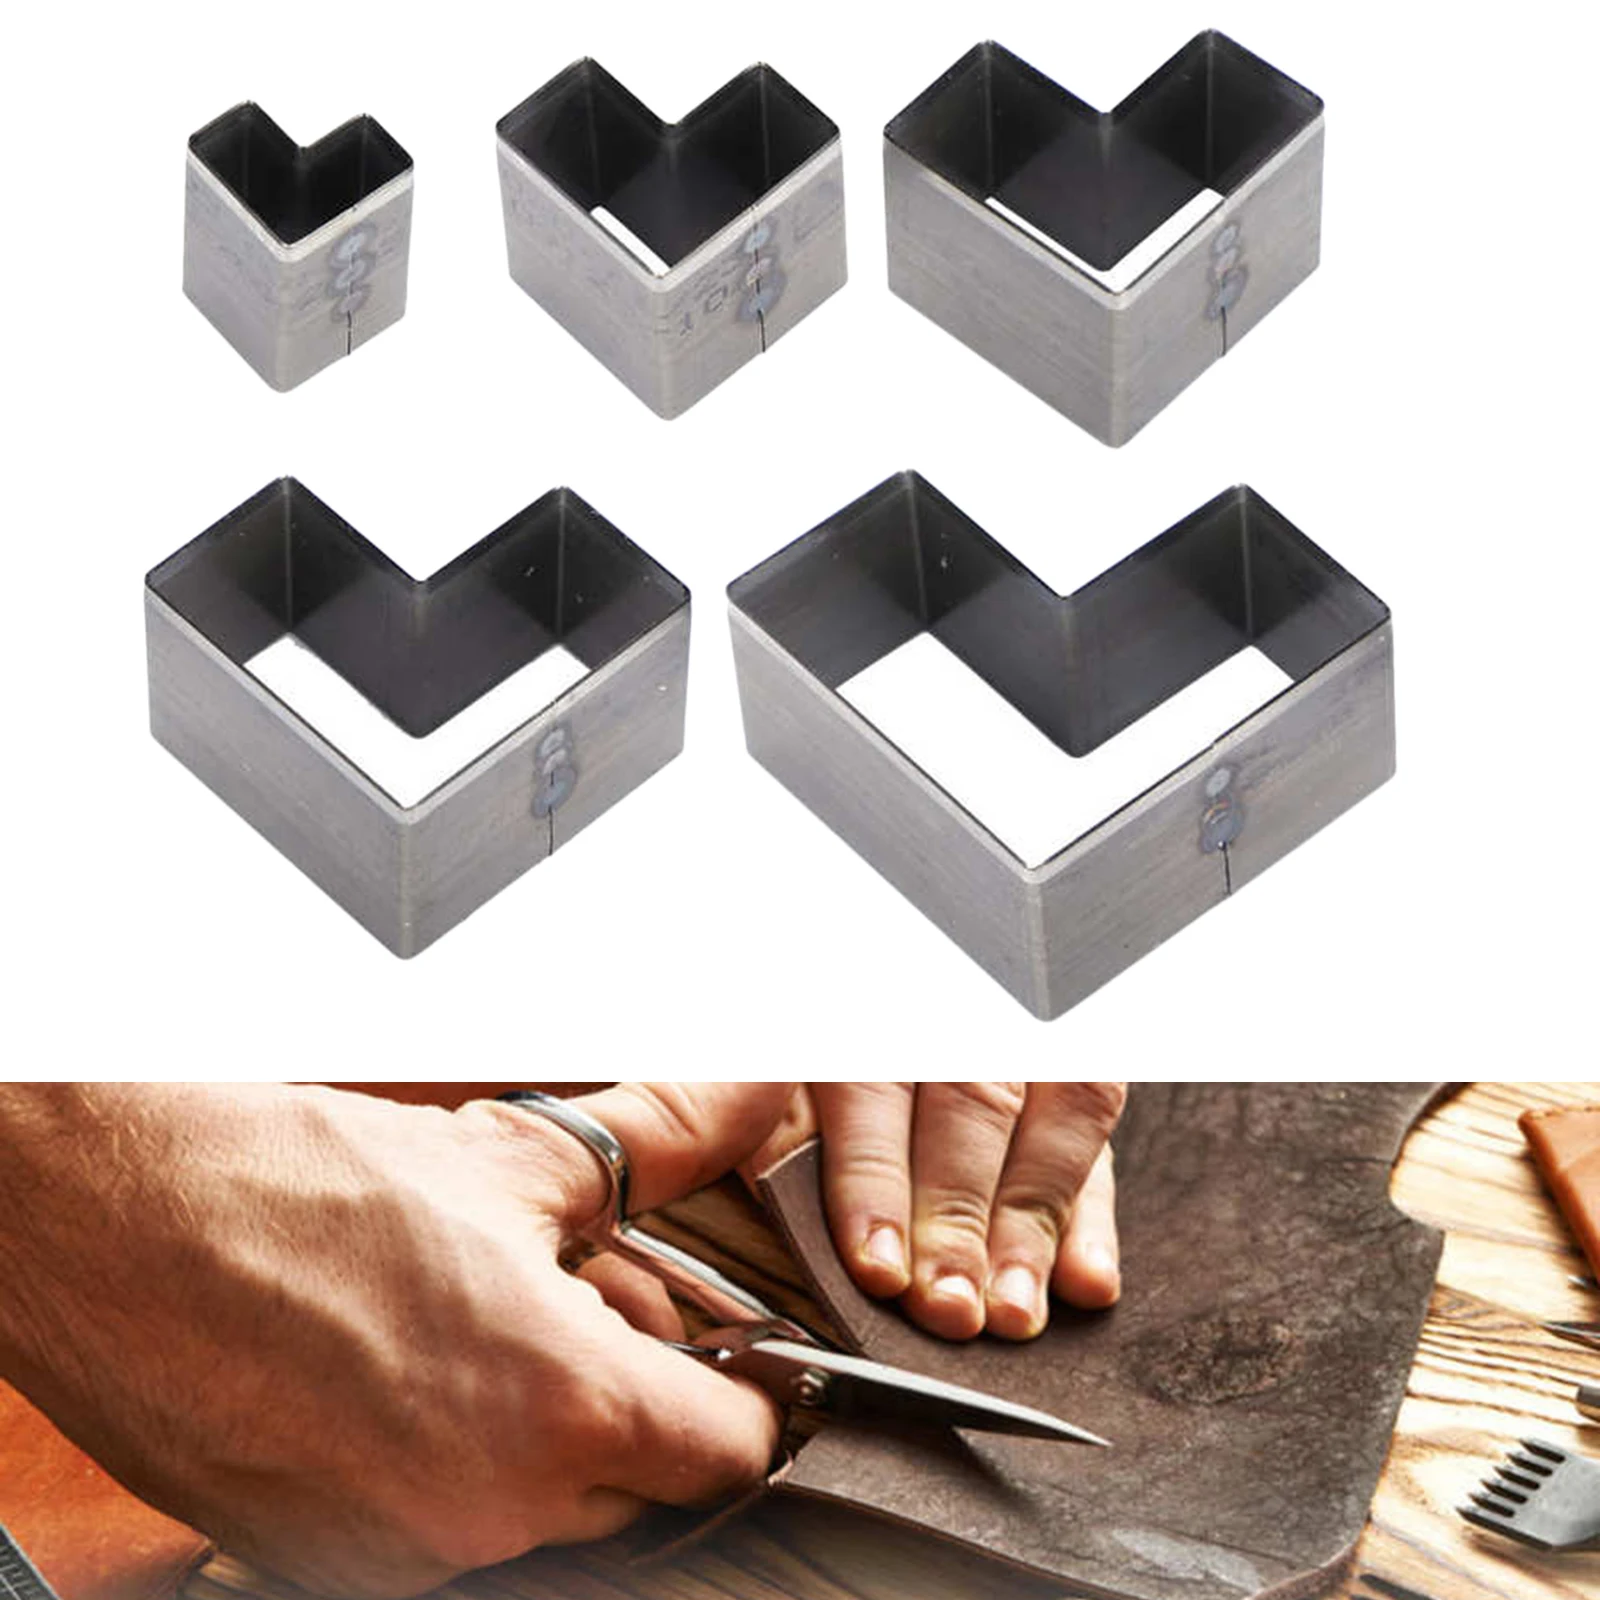 Buy 5Pcs Heart Leather Hole Hollow Punch Cutter Tool Craft Set DIY for Handmade Leathercraft Jewelry Making on